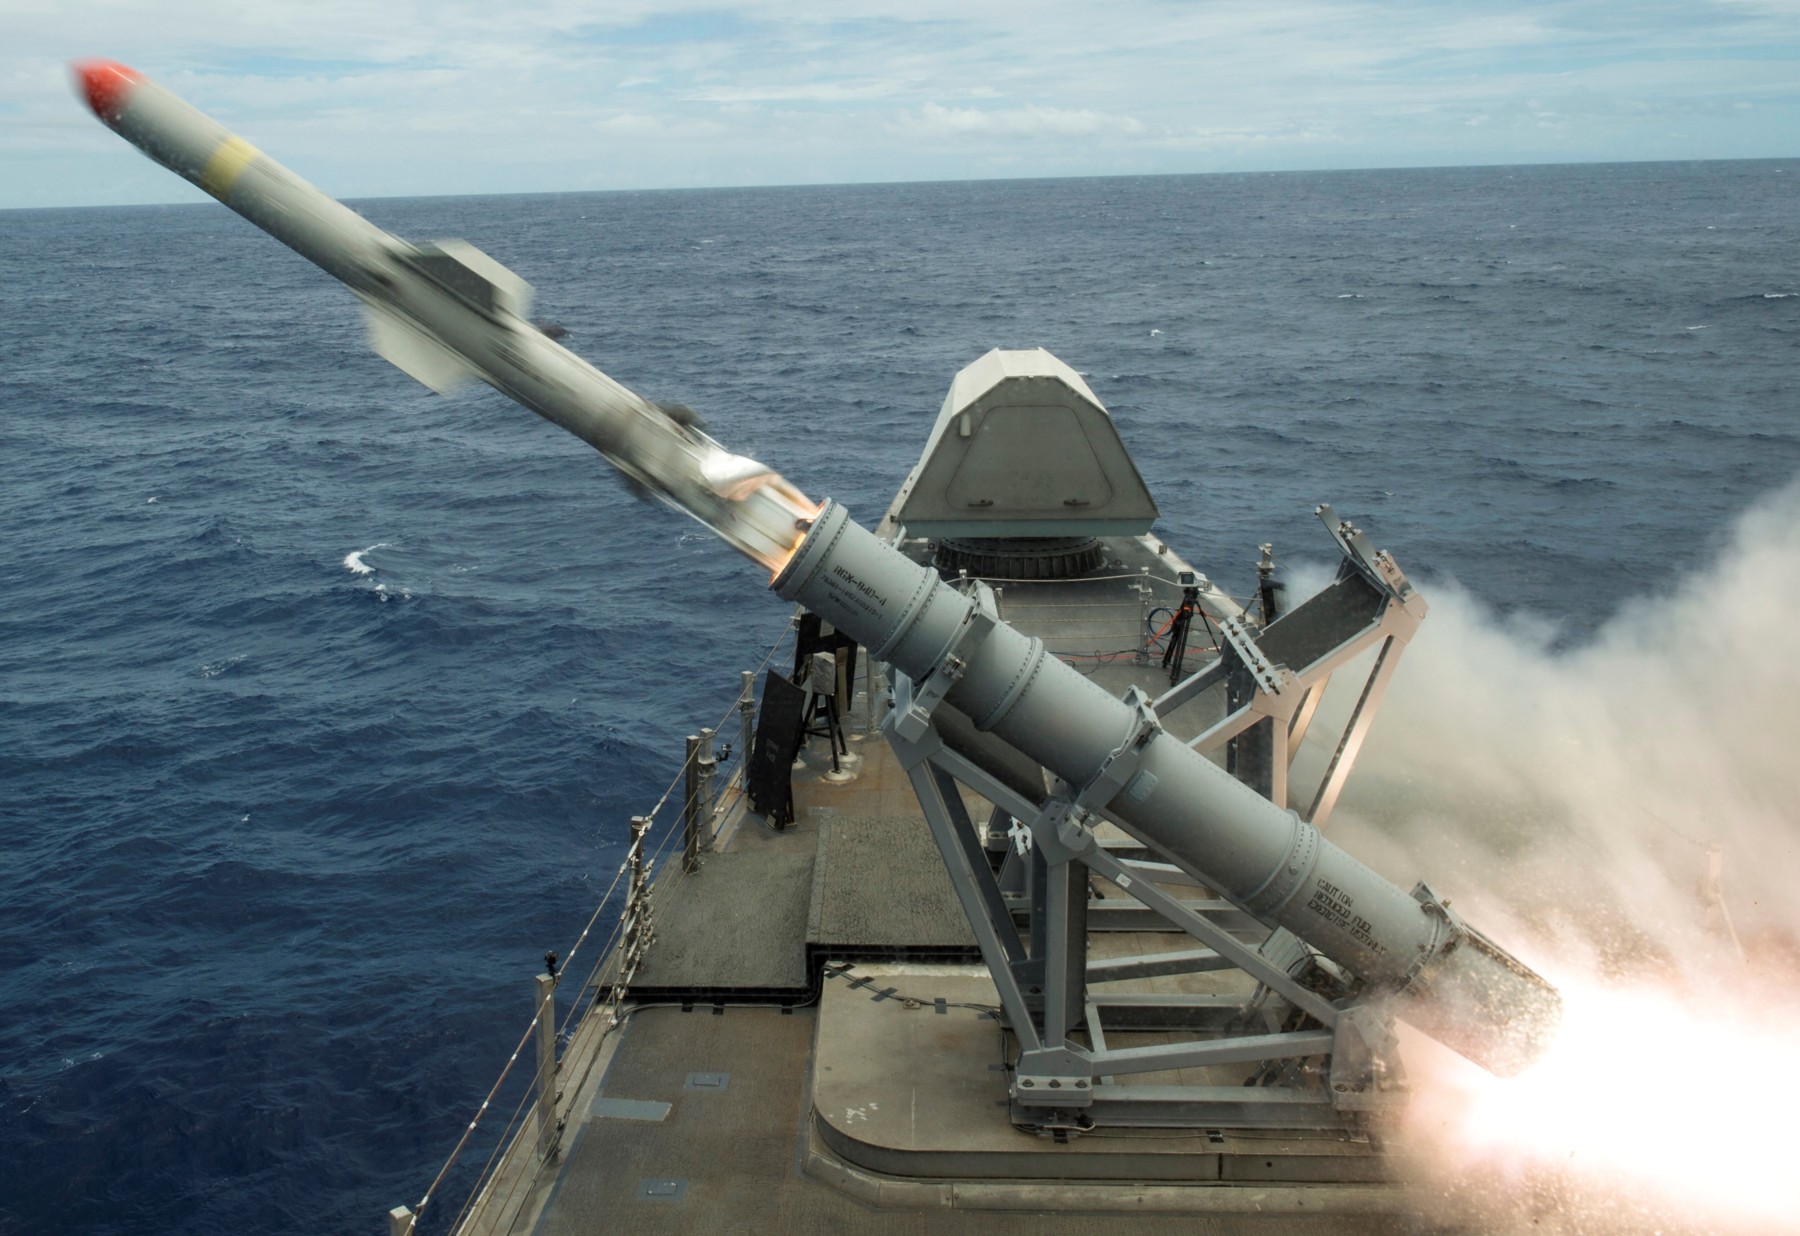 rgm-84 harpoon ssm mk-141 missile launcher independence class littoral combat ship lcs 48